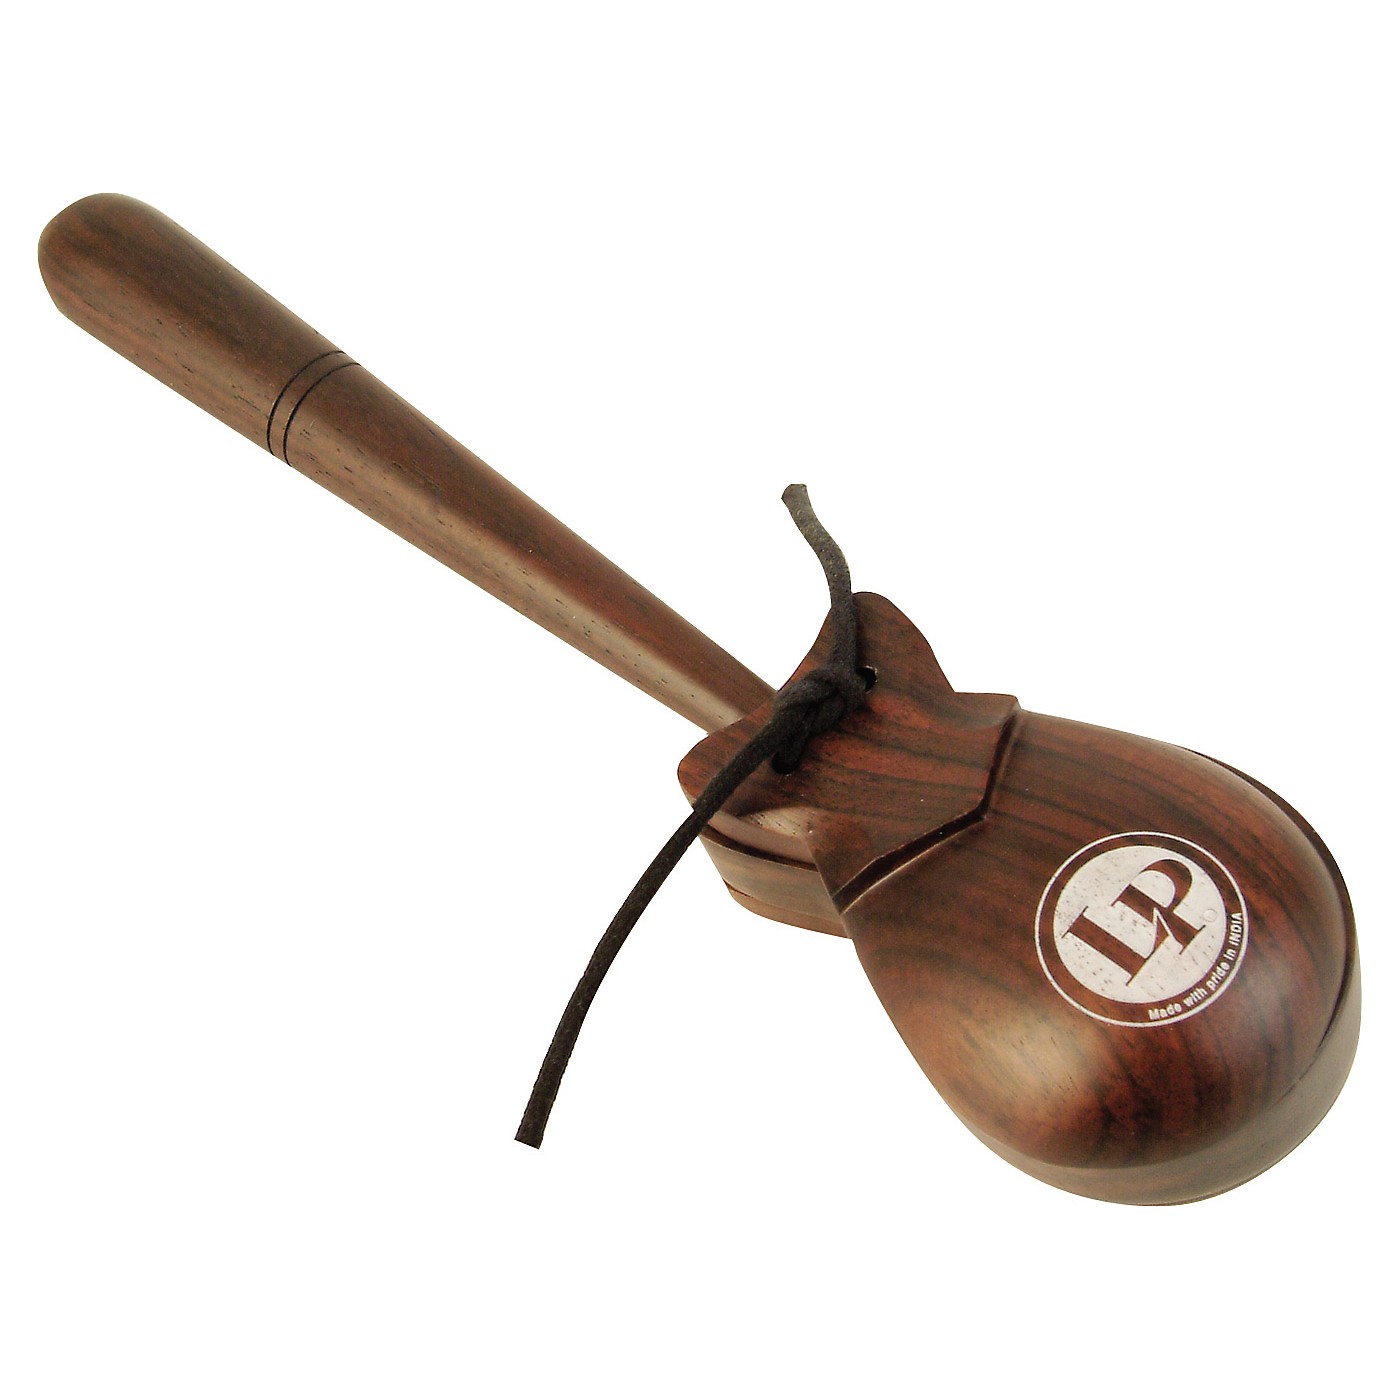 LP Rosewood Castanets thumbnail